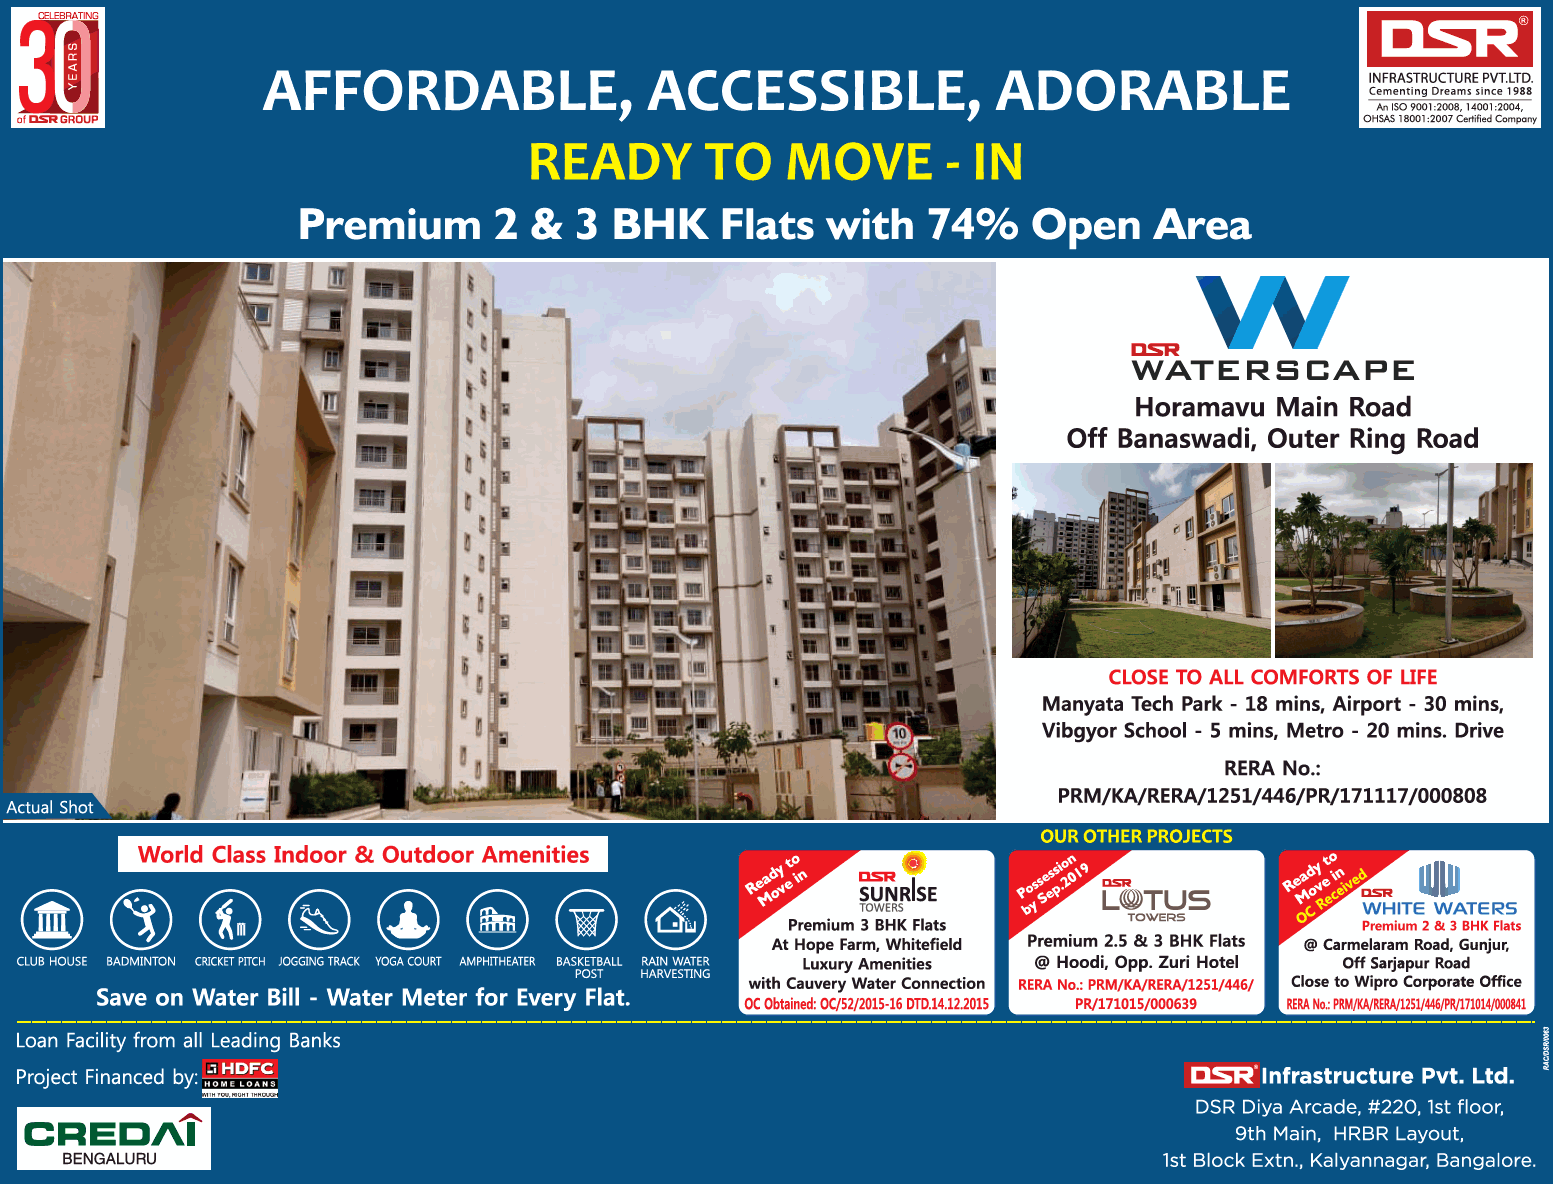 DSR Waterscape premium 2 & 3 bhk flats with 74% open area in Bangalore Update